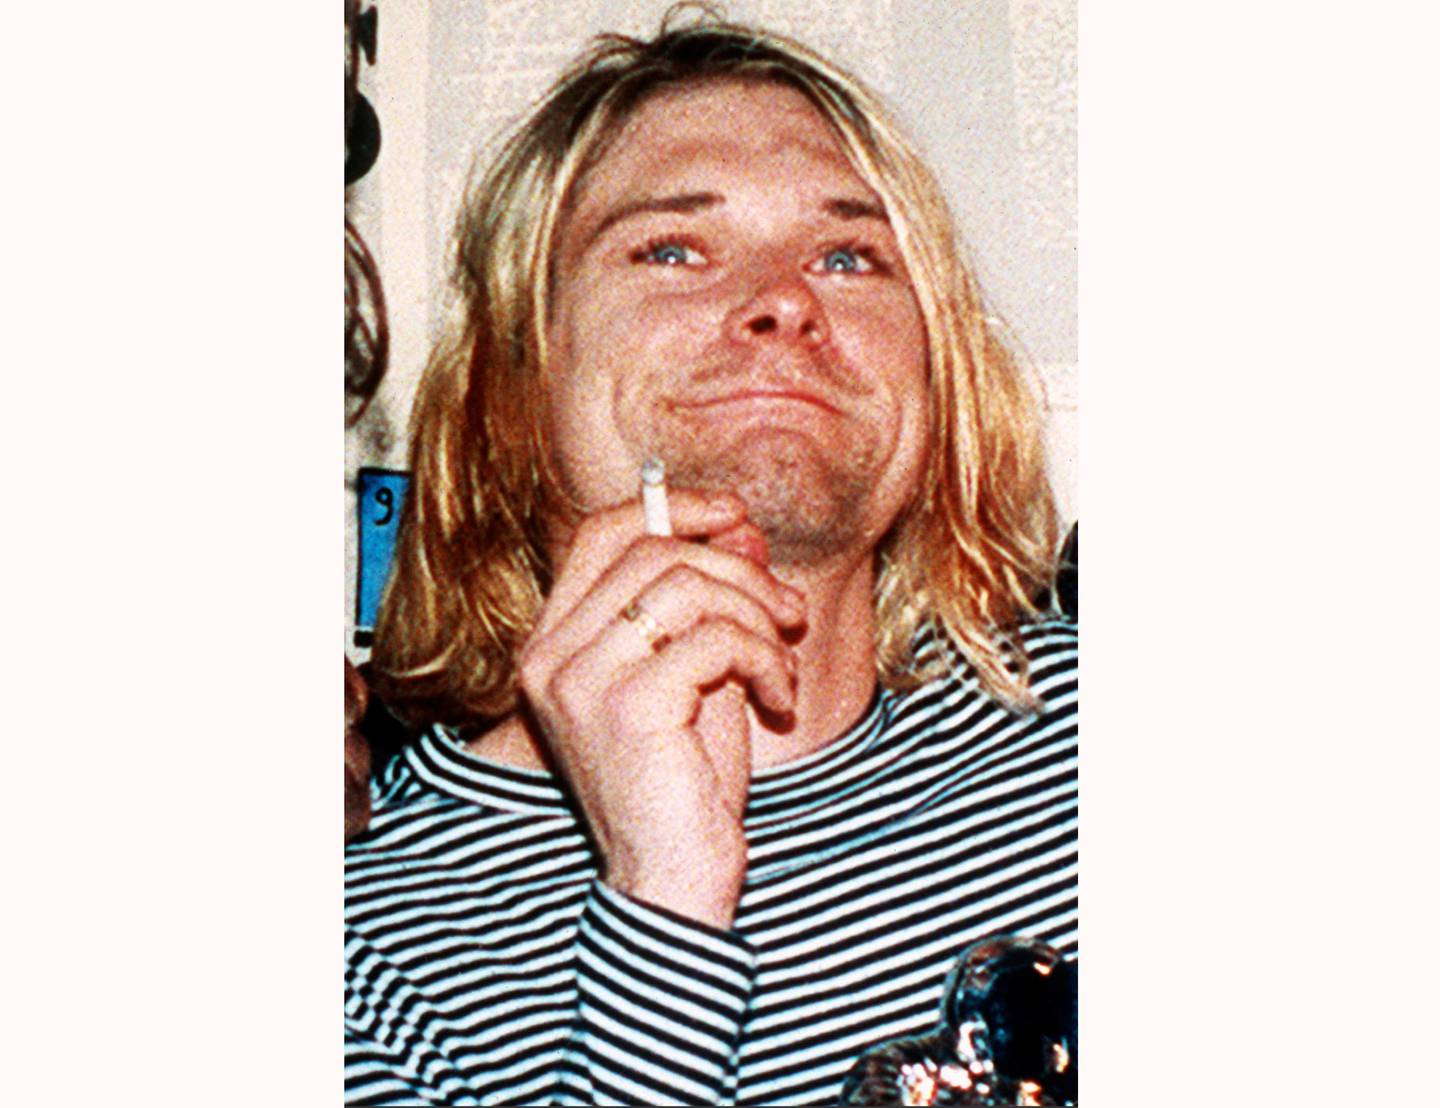 FILE - This 1993 file photo shows Kurt Cobain, the lead singer of the U.S. rock band Nirvana. Grunge became gold Saturday, June 20, 2020, as the guitar Cobain played on Nirvana's 1993 MTV Unplugged performance sold for an eye-popping $6 million at auction. (AP Photo/Mark J. Terrill, File)